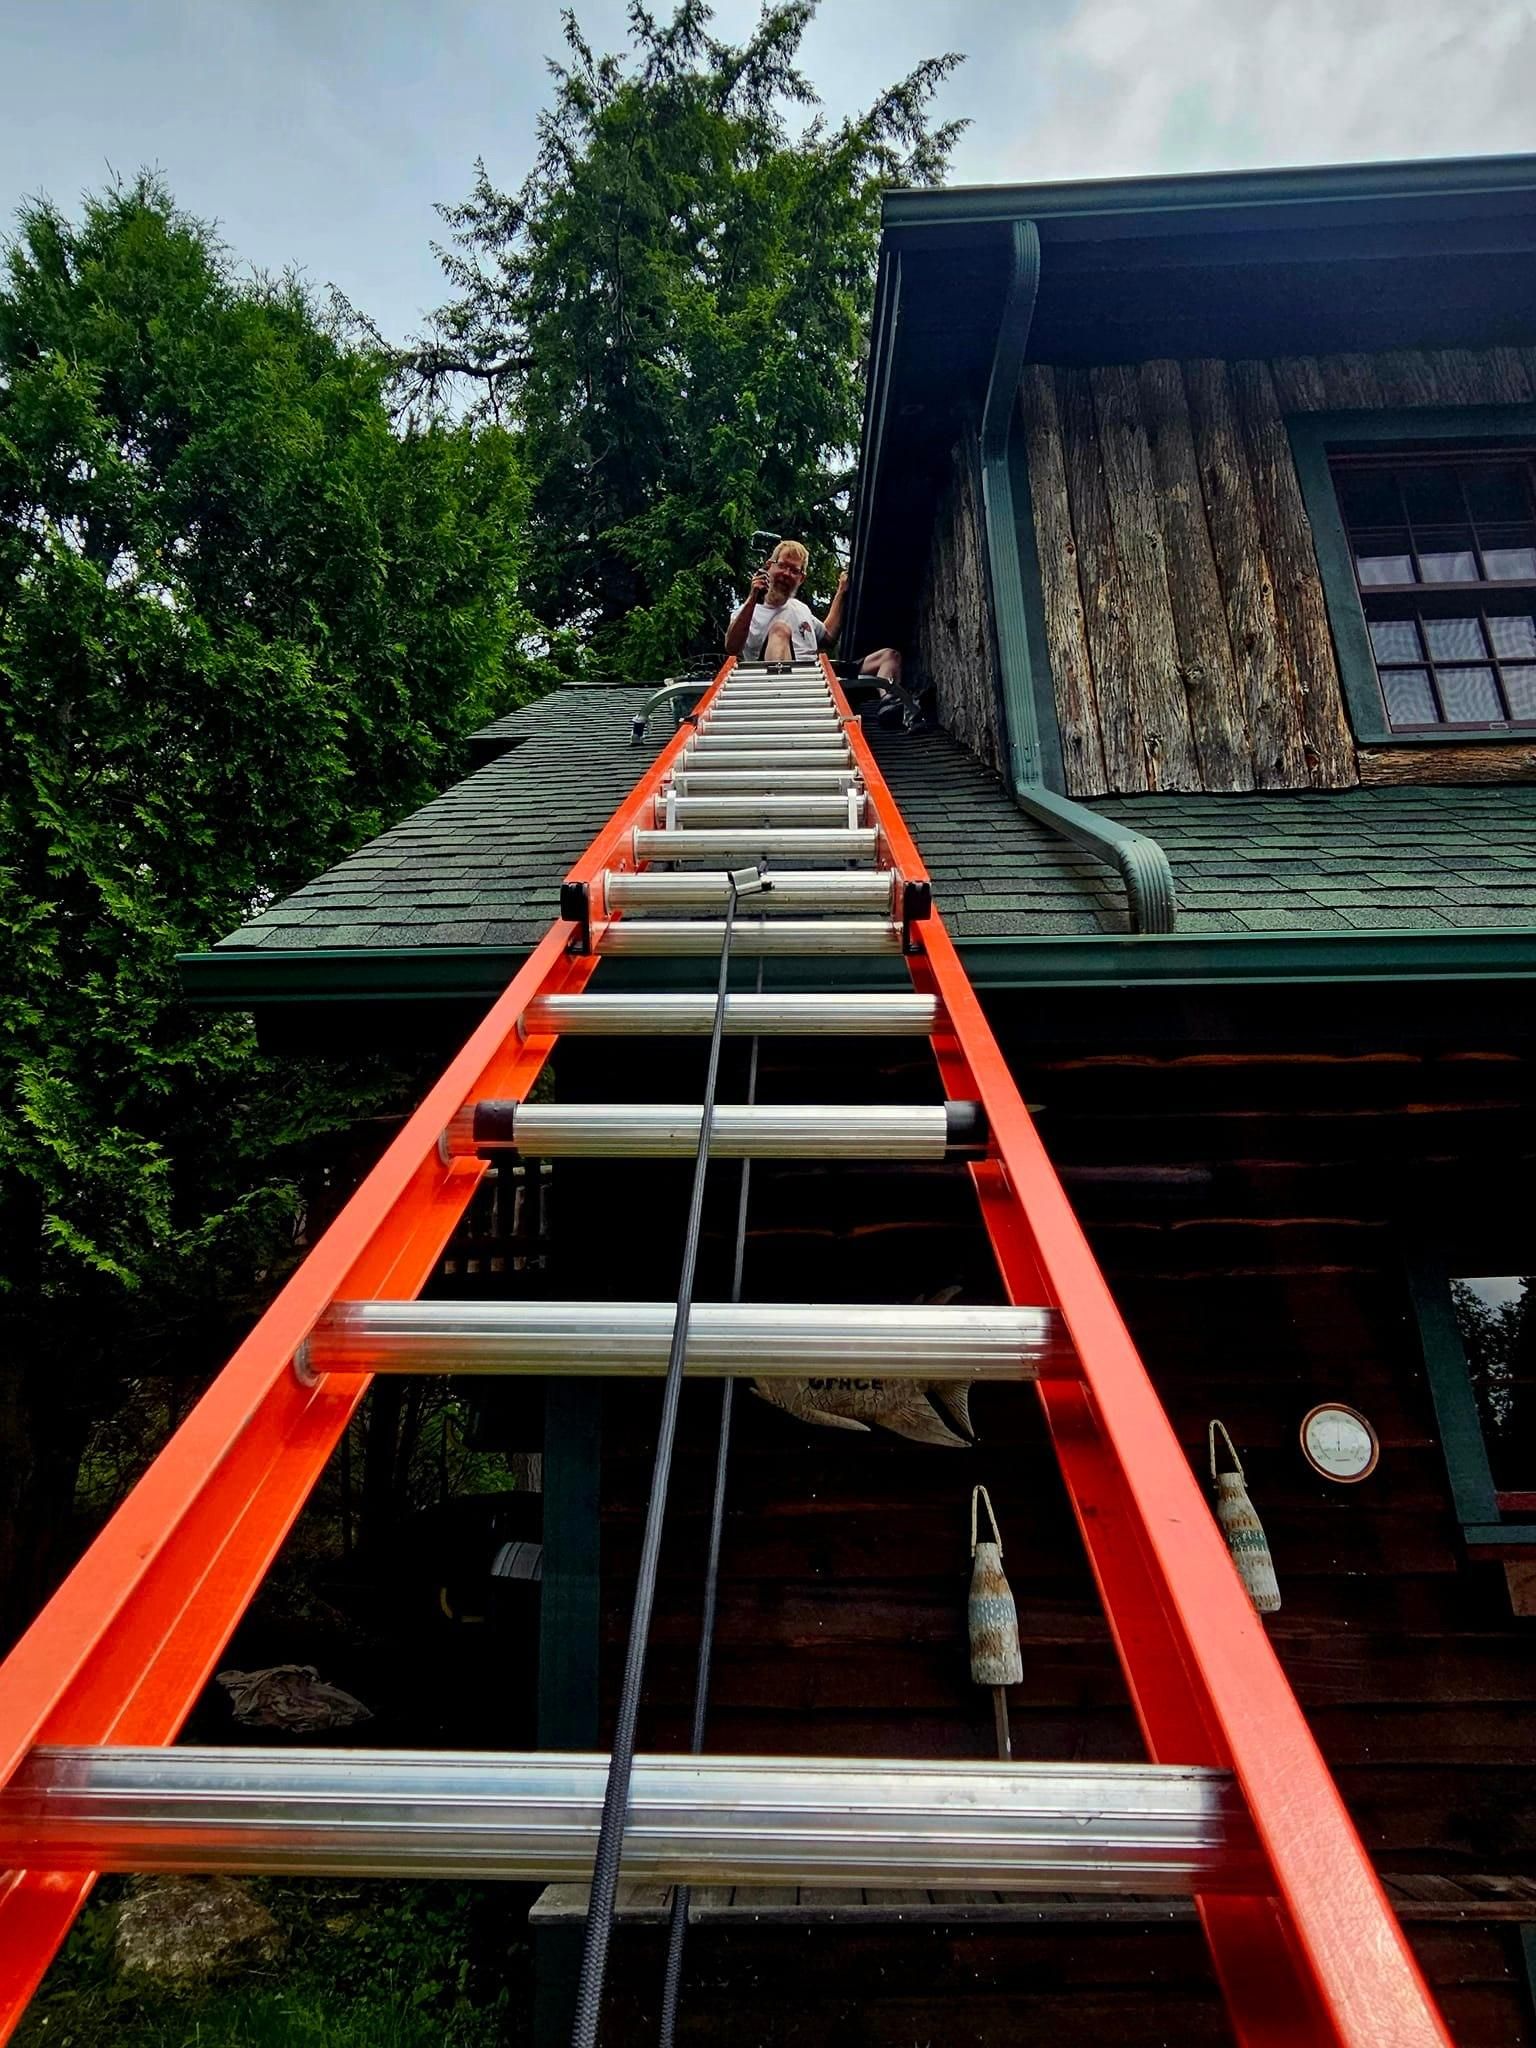 Exterior Painting for Red Maple Painting in Plattsburgh, NY